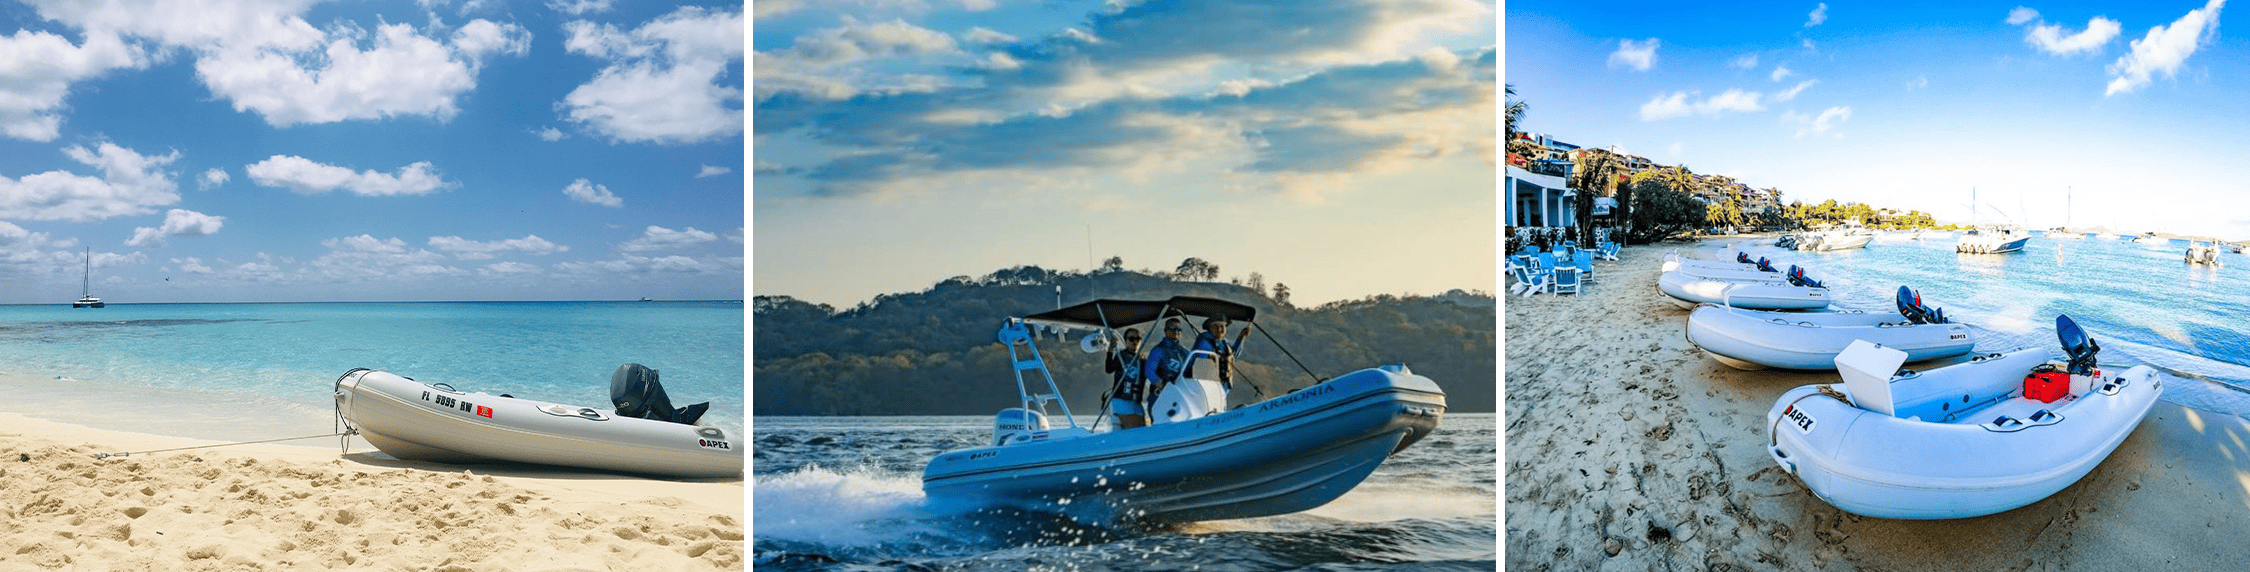 Dinghies / Inflatables Accesories | Fuel tanks, Fuel Lines, and More